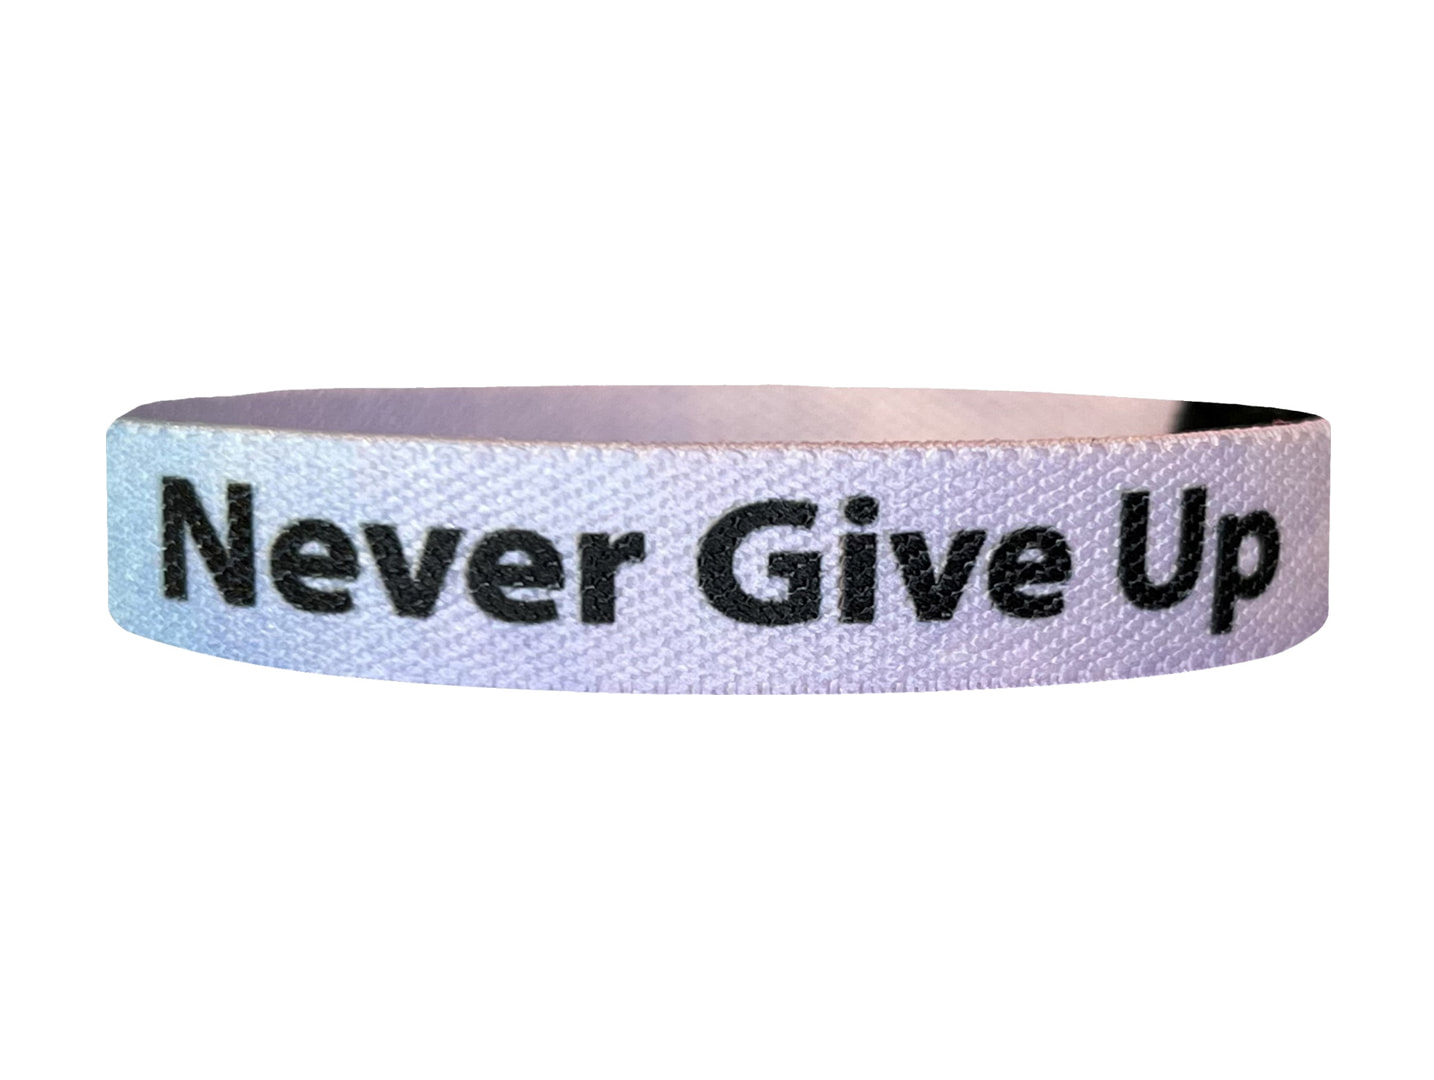 Never Give Up Motivational Wristband (Thin)